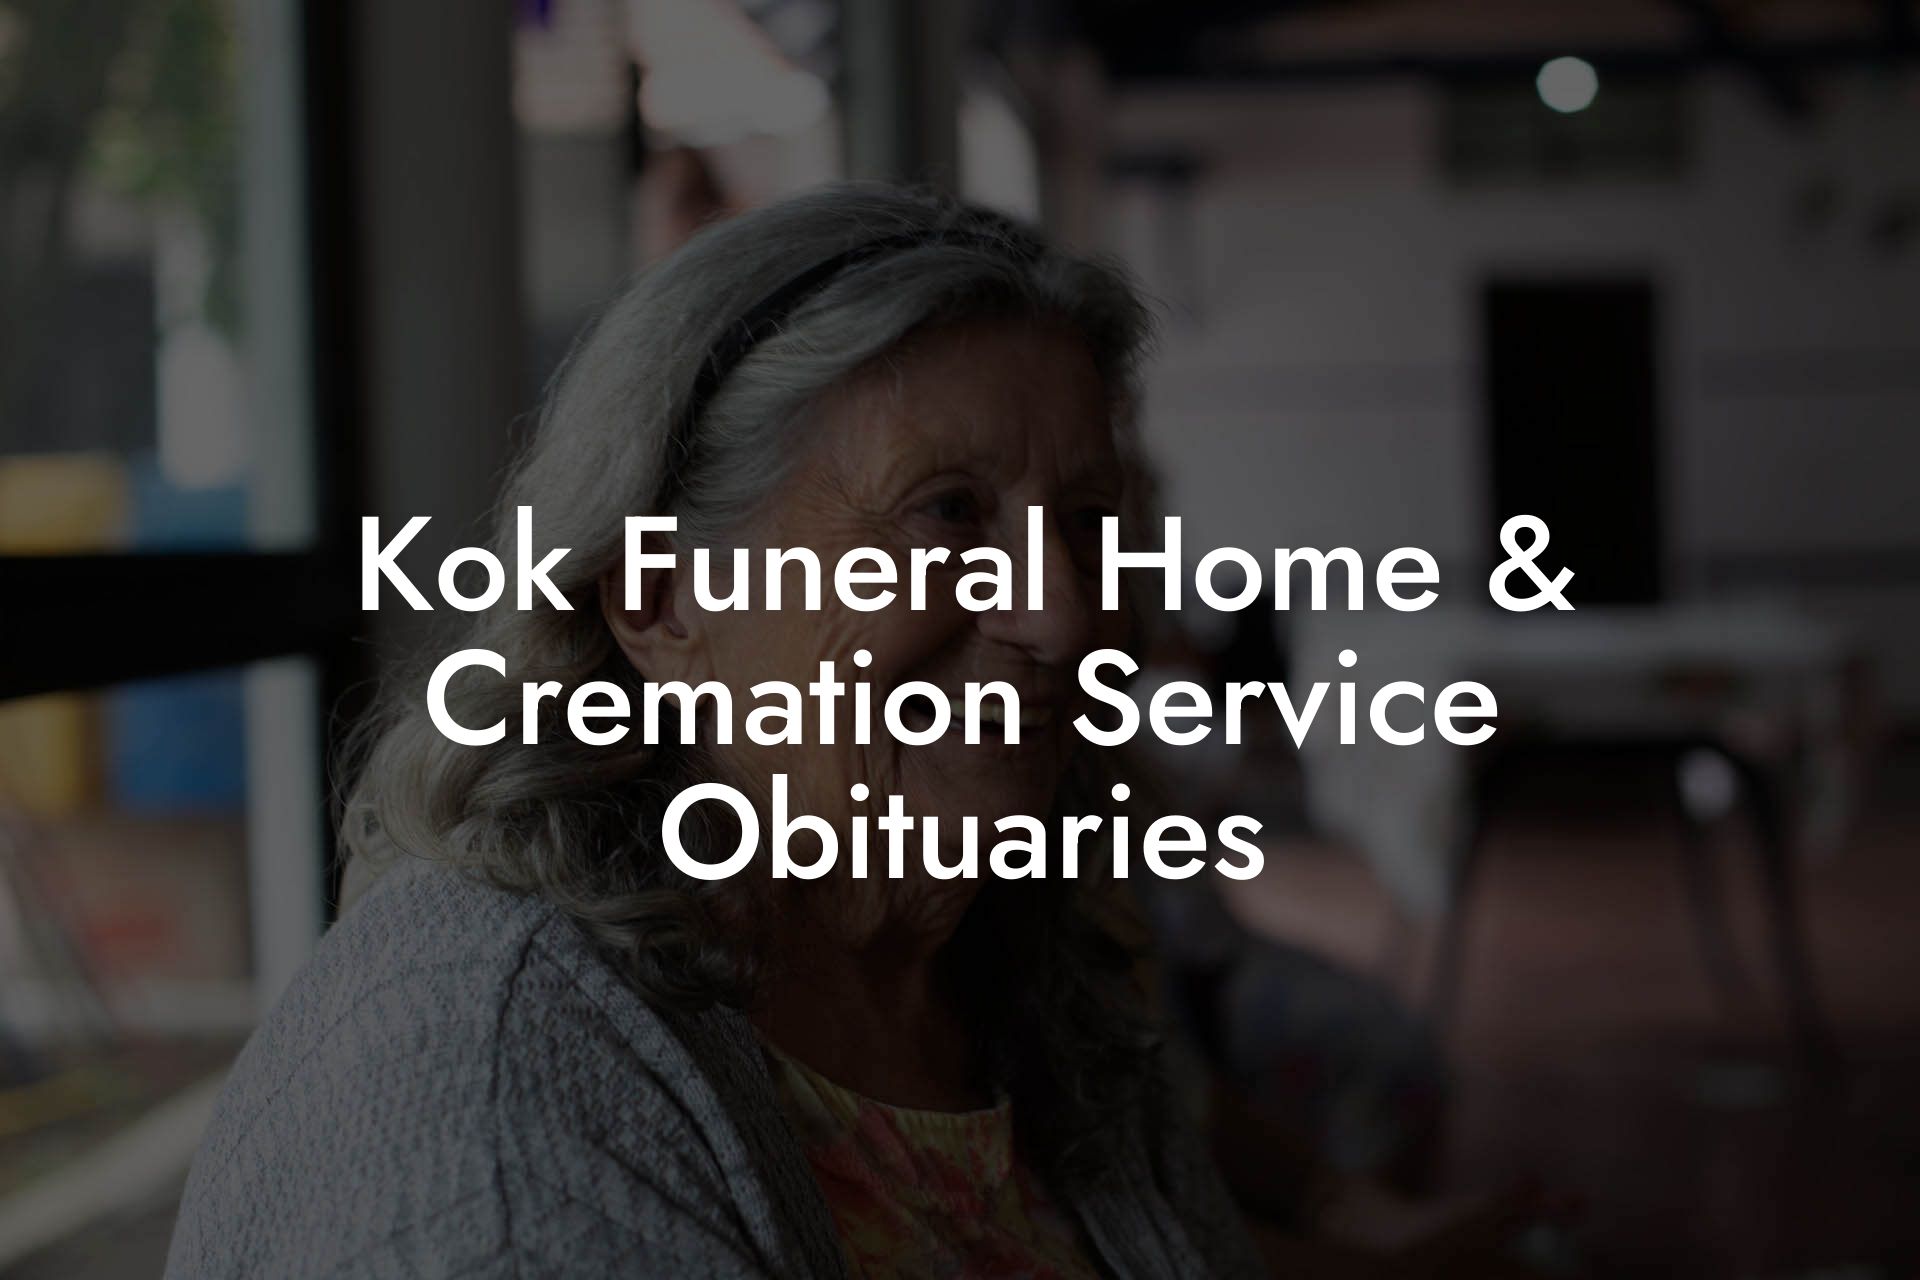 Kok Funeral Home & Cremation Service Obituaries